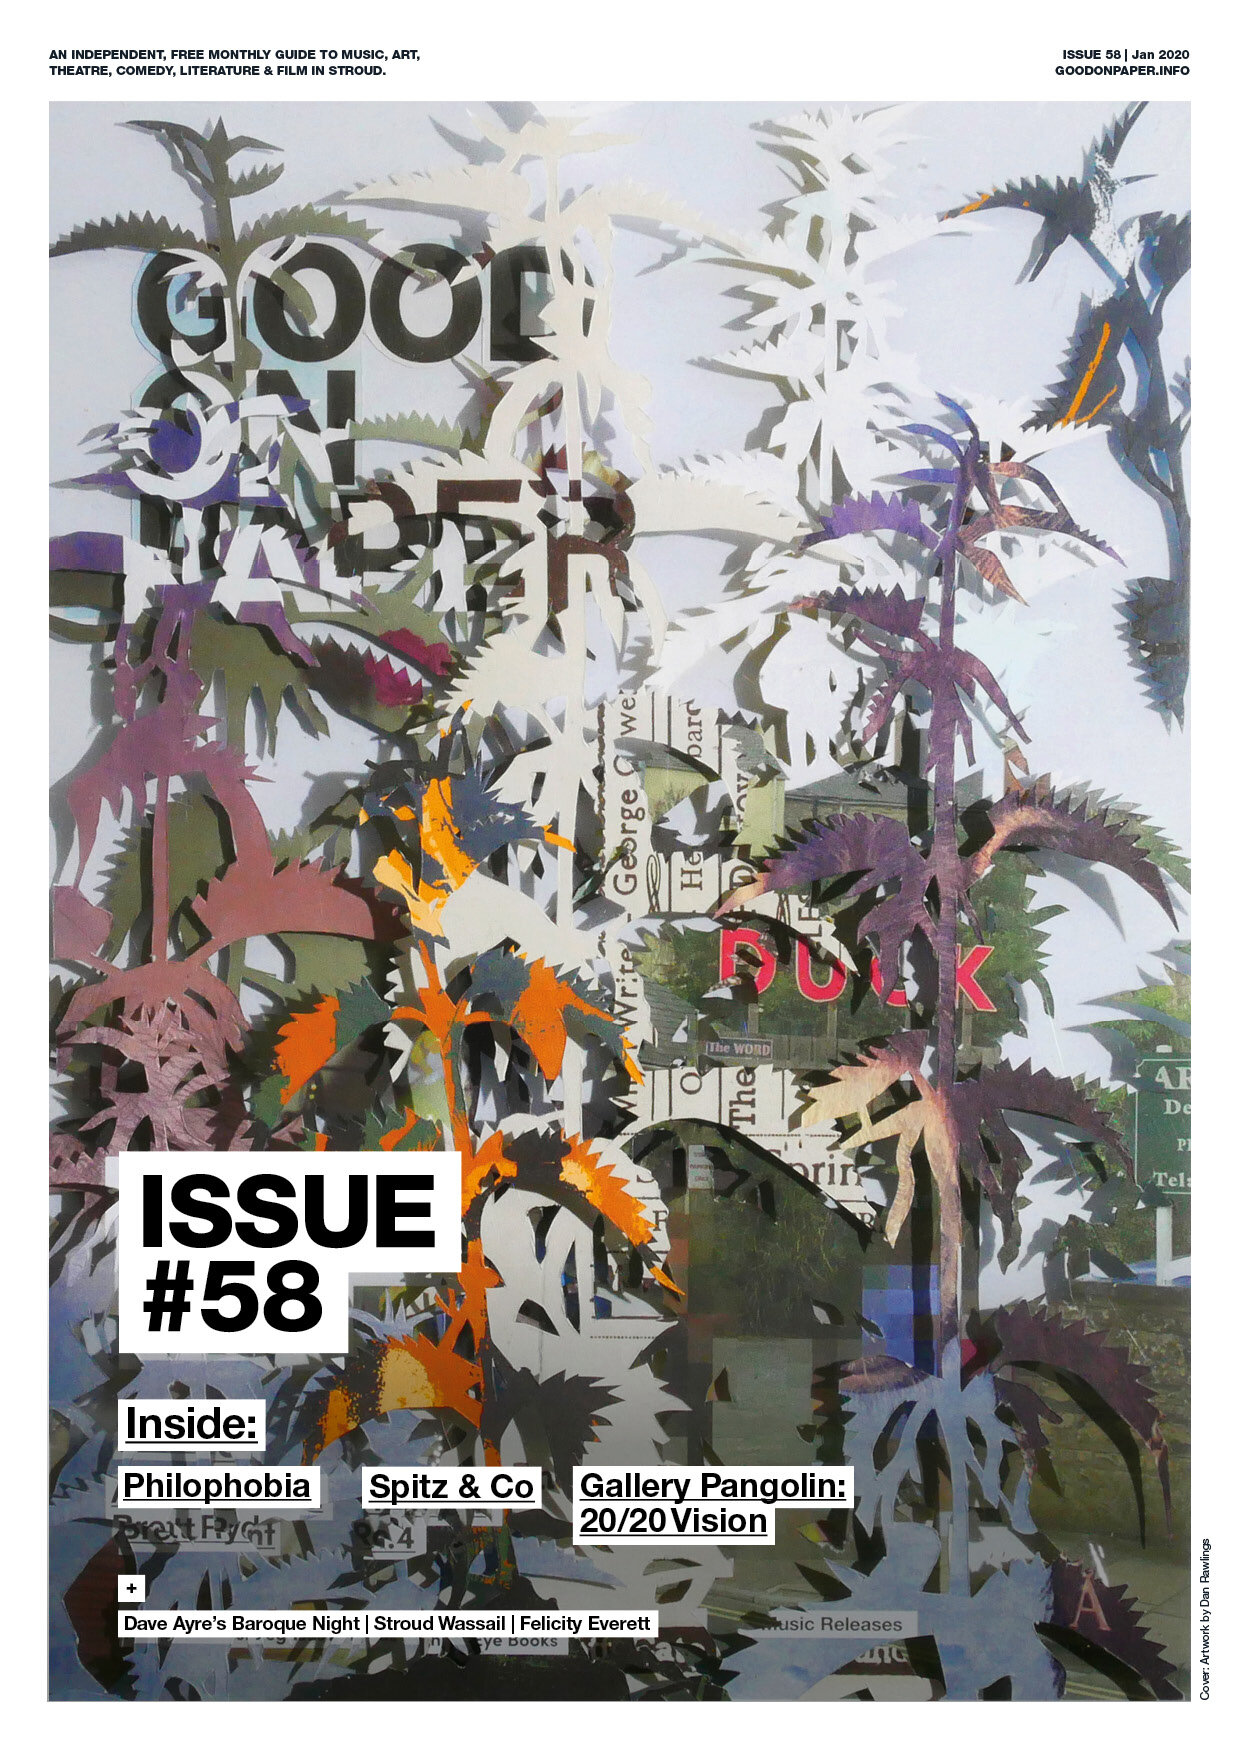 Issue 58 - January 2020